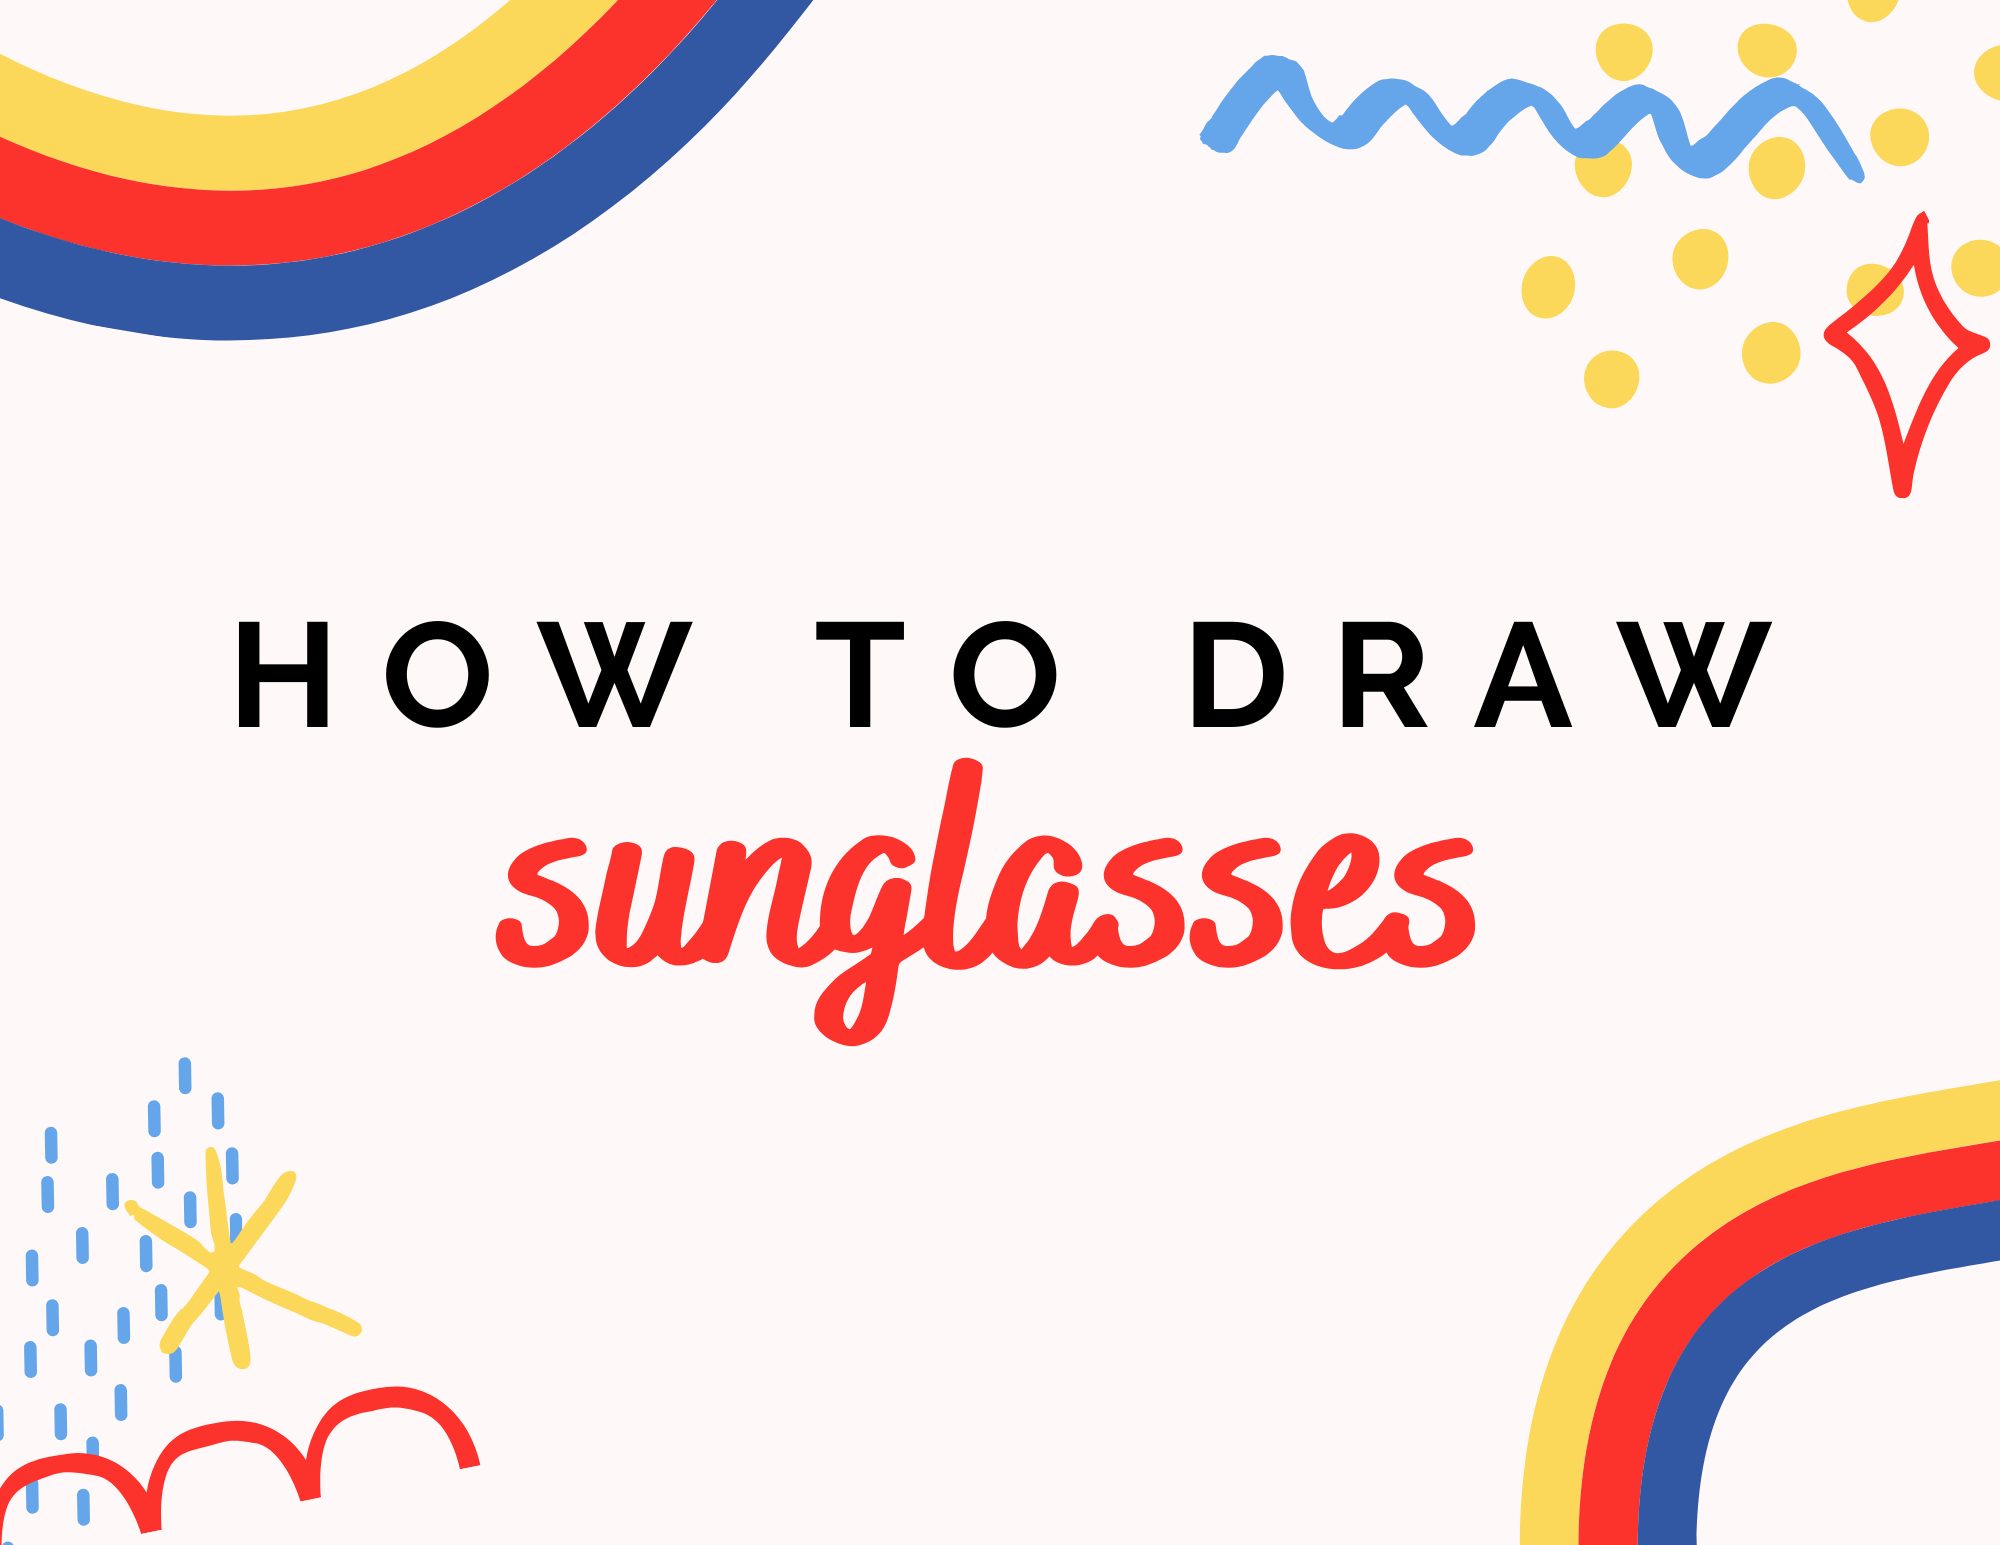 How to Draw Sunglasses